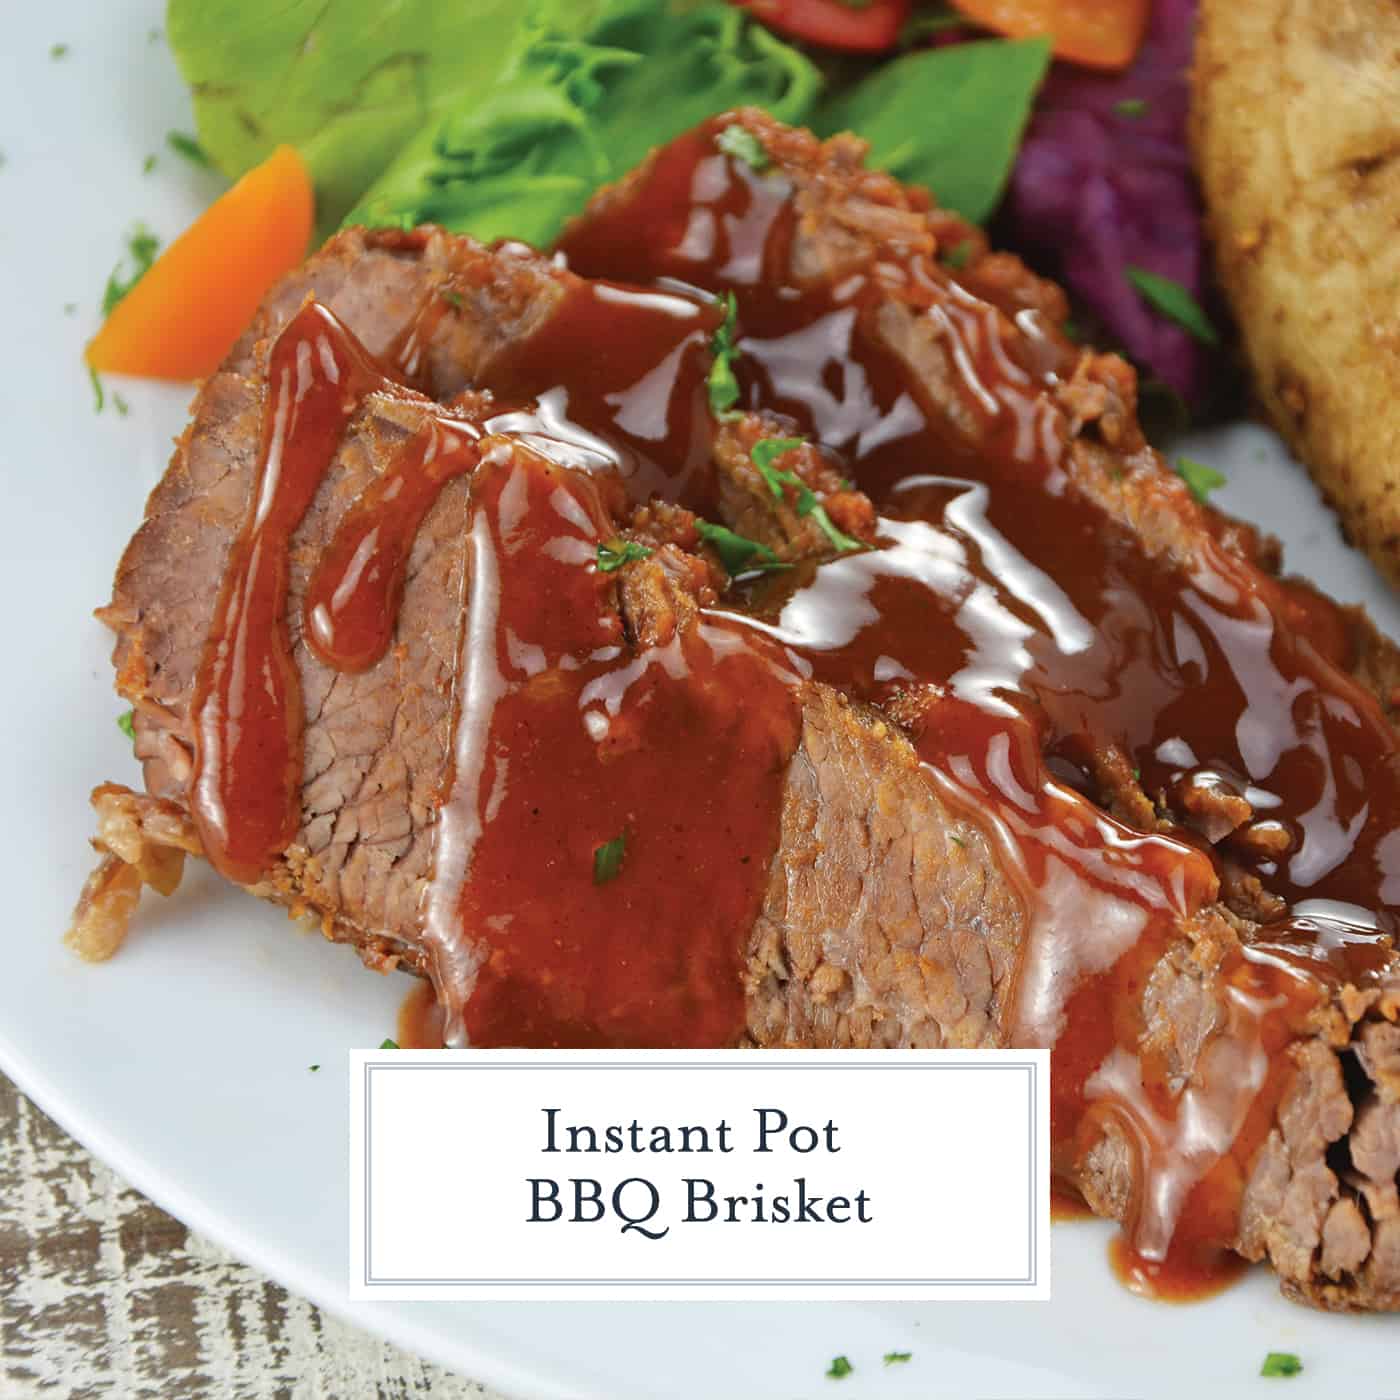 Instant Pot BBQ Brisket is the perfect dinner idea! Brisket will stay moist and offer loads of flavor.#instantpotrecipes #BBQbrisket #howtocookbrisket www.savoryexperiments.com 